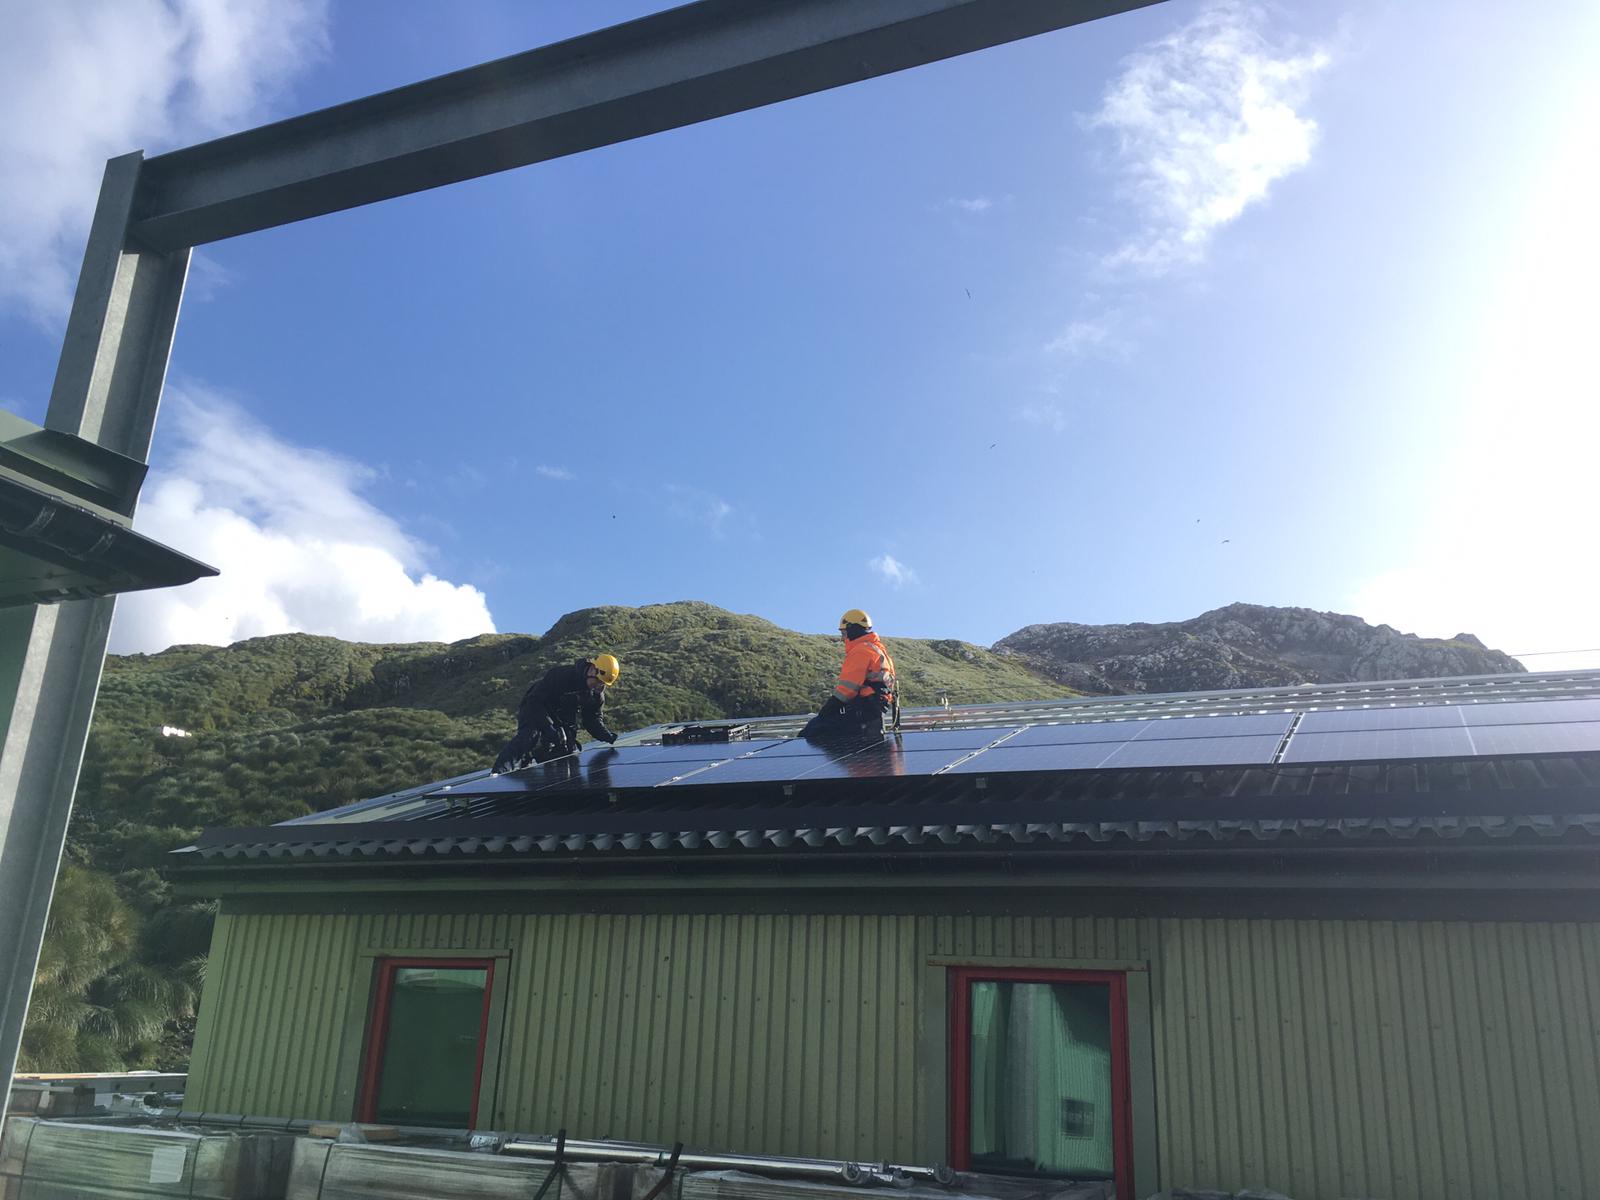 New solar panels being installed at Bird Island Research Station